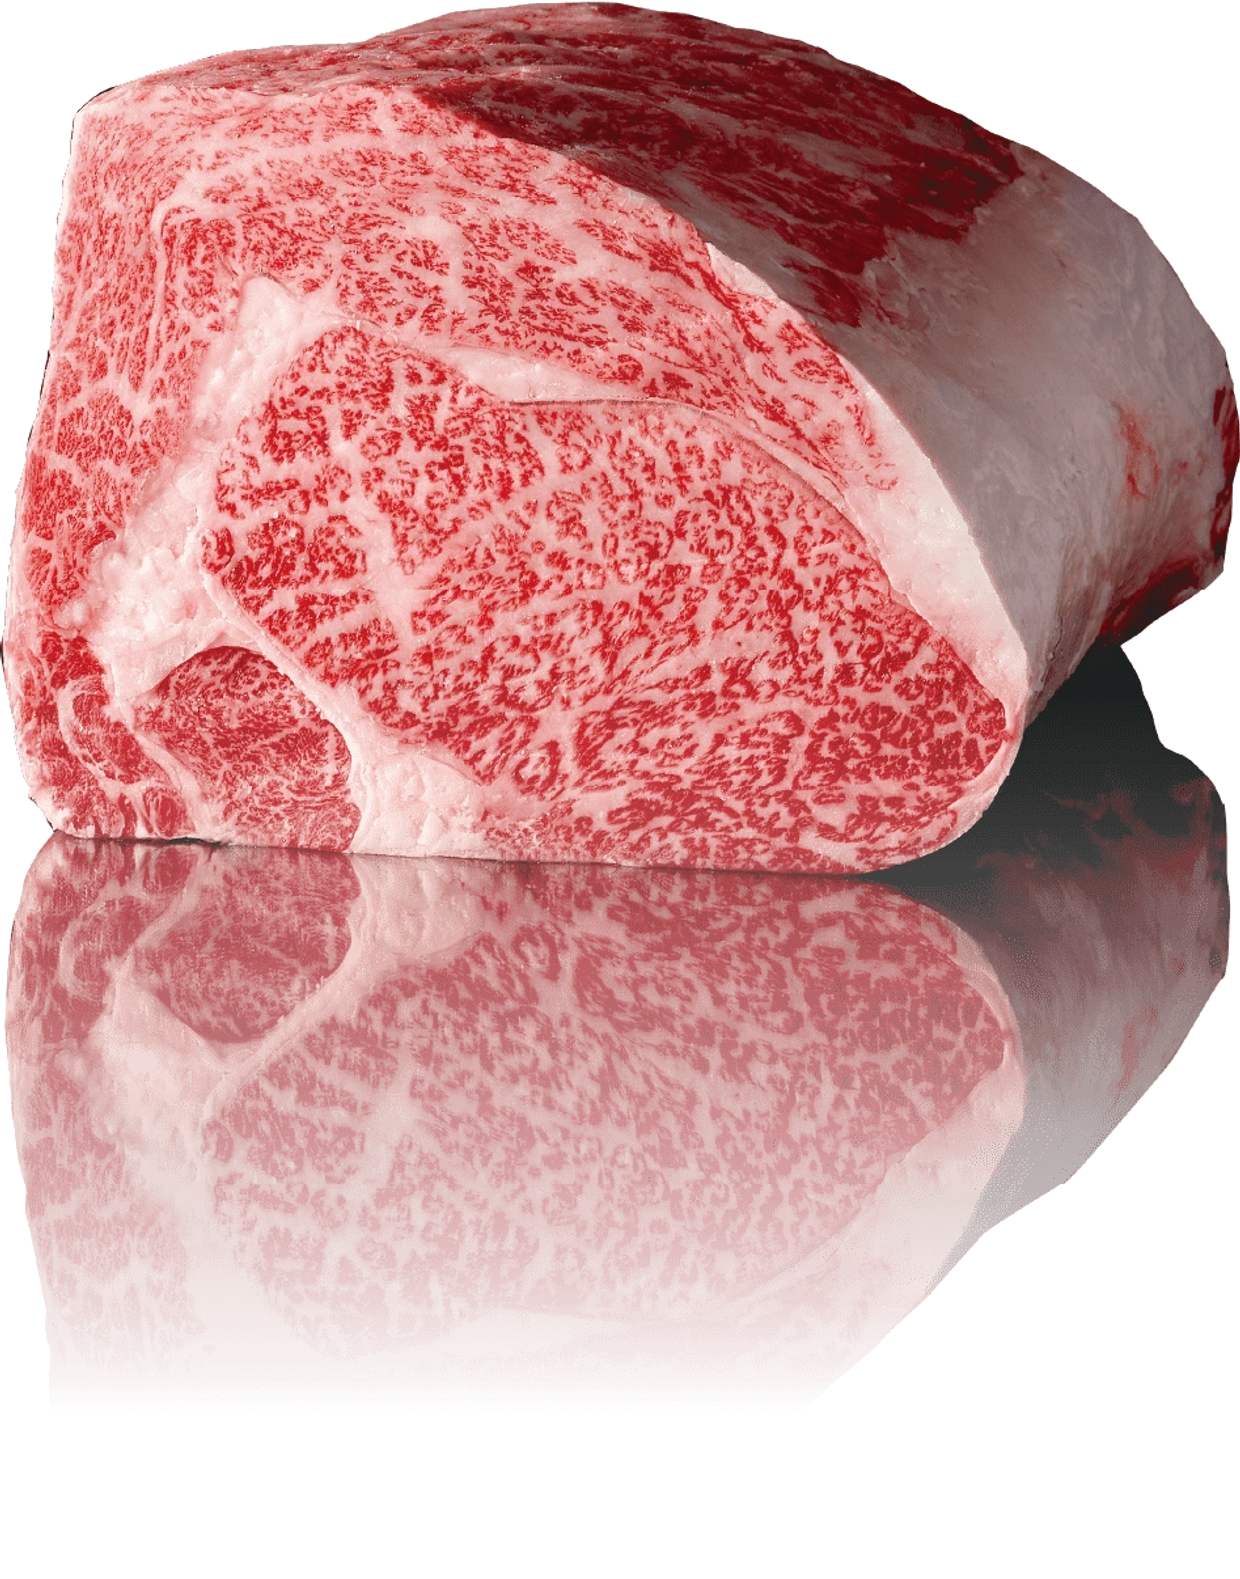 Wagyu Cow Price: Understanding the Cost of this High-Quality Beef